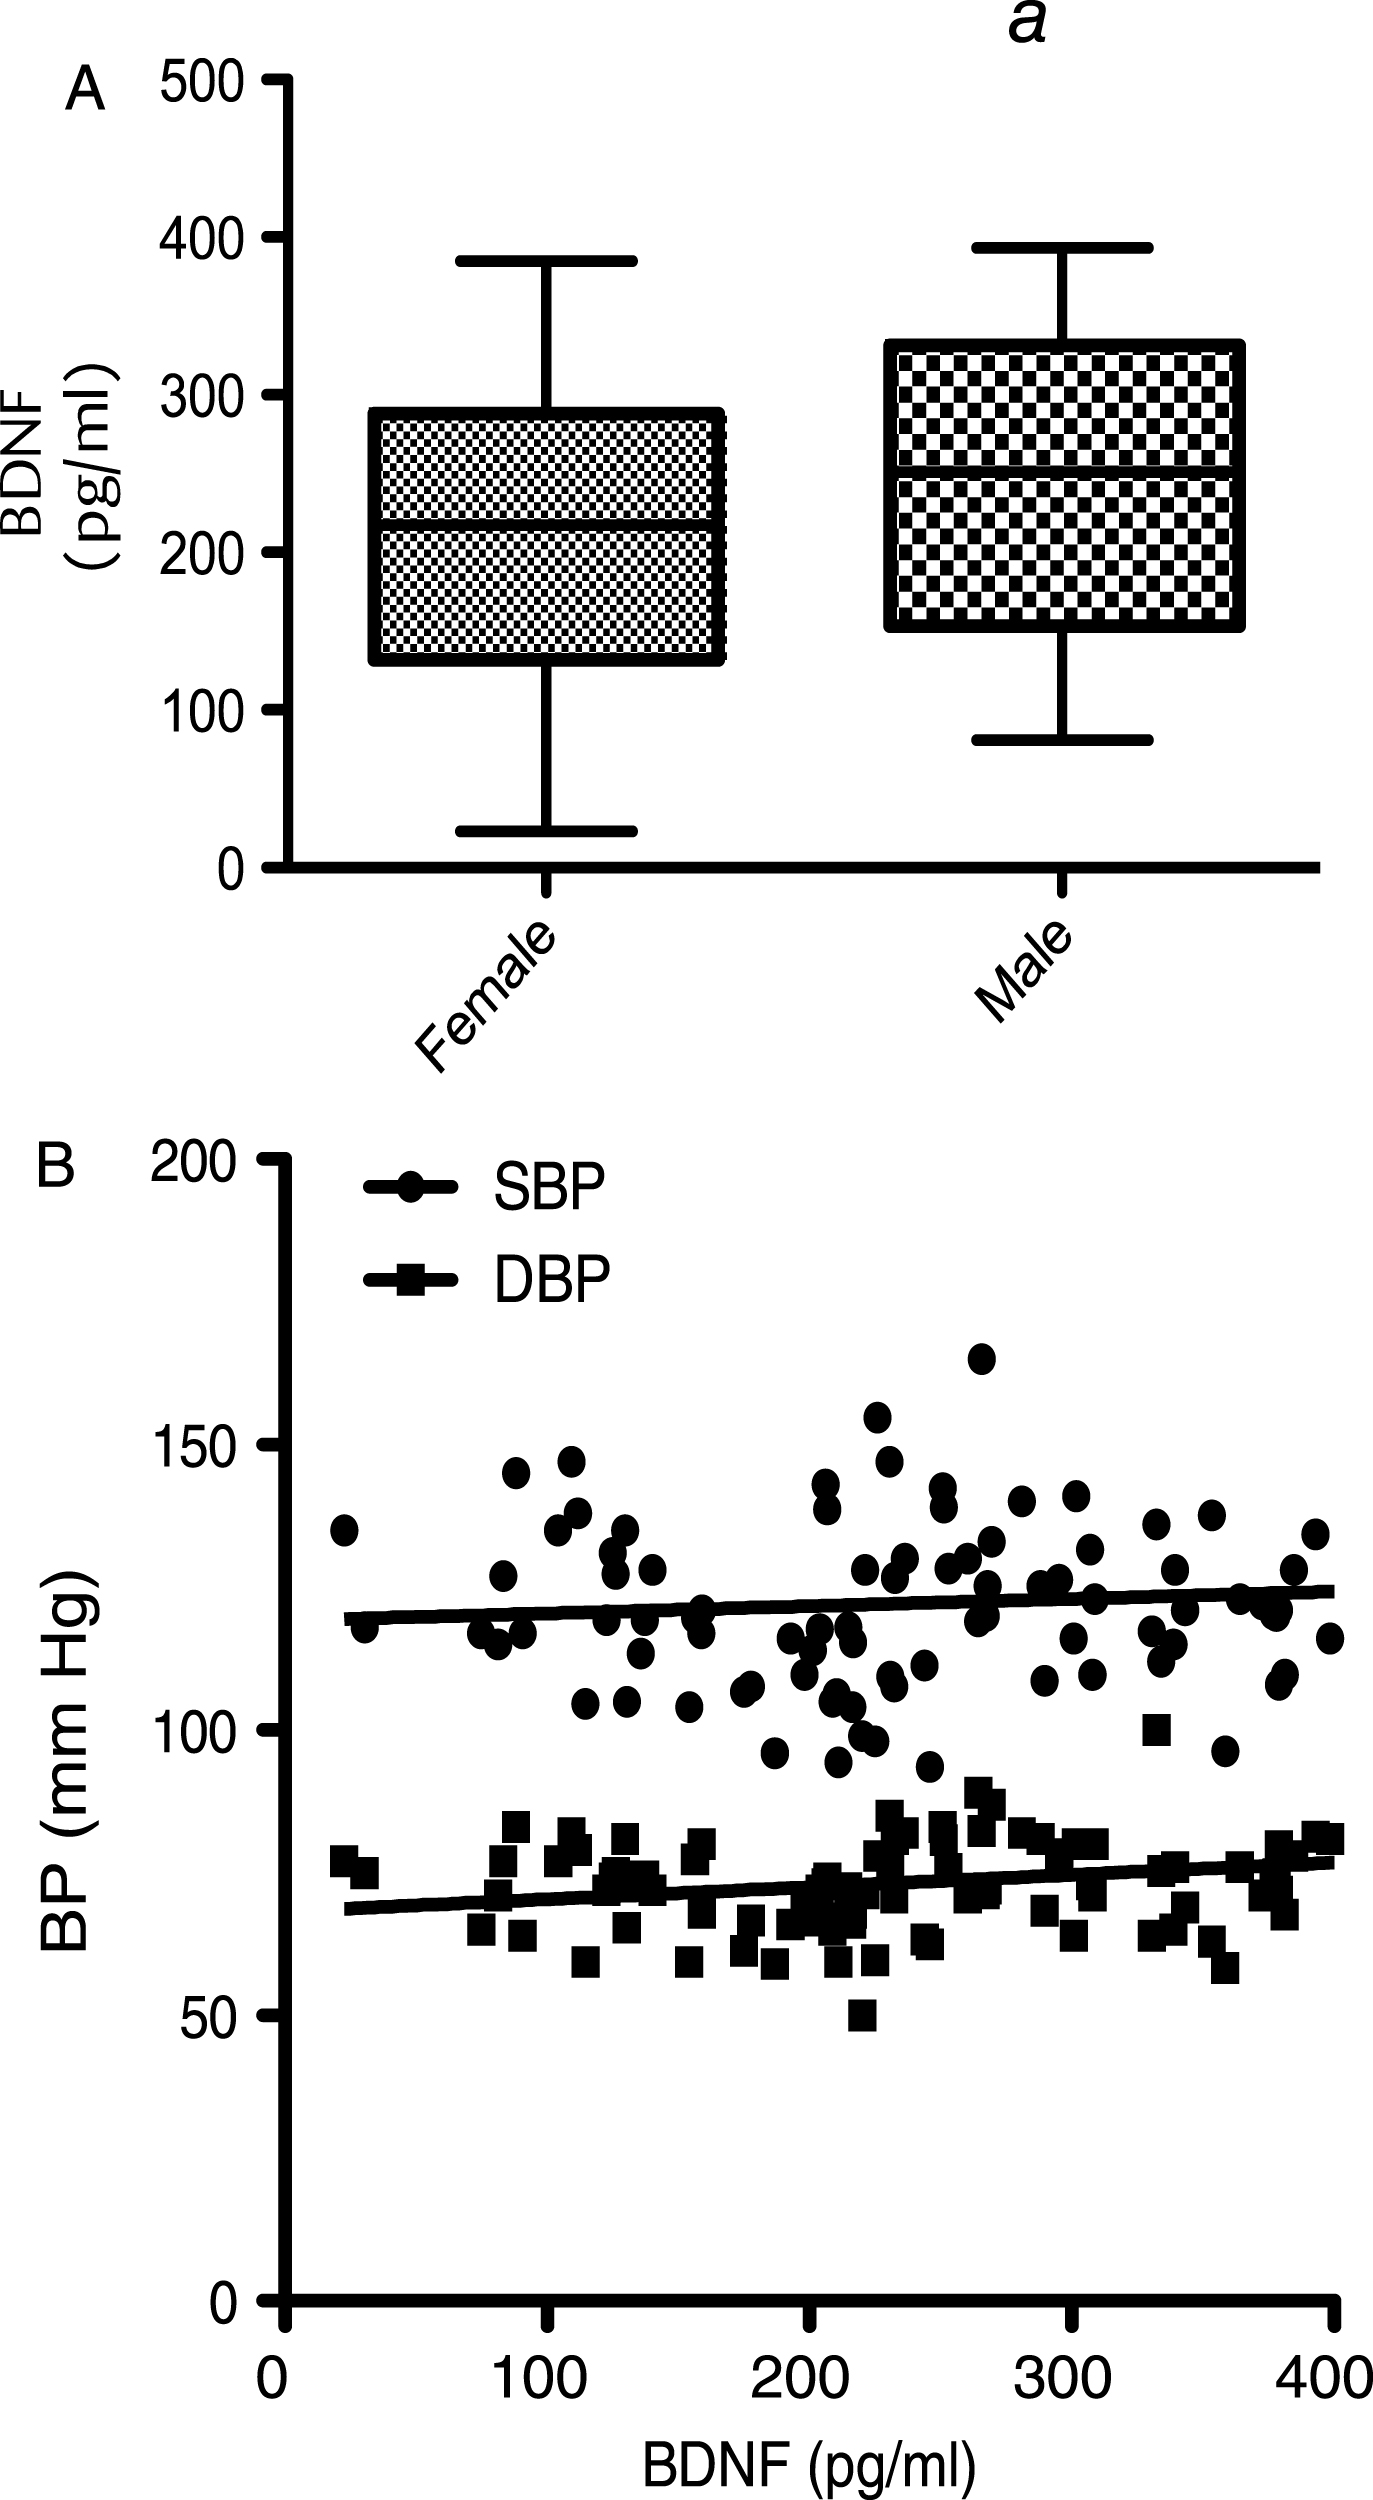 Corellation of BDNF with anthopometric 
measures: (A) Serum BDNF levels measured in males and females at baseline. (B) Correlation of BDNF level with 
Systolic Blood Pressure (SBP) and Diastolic Blood Pressure (DBP). Mean serum BDNF levels showed a trend to be 
higher in males compared to females (p = 0.056), whilst no significant differences between BDNF level 
and either SBP (p > 0.05) or DBP (p > 0.05) were observed.